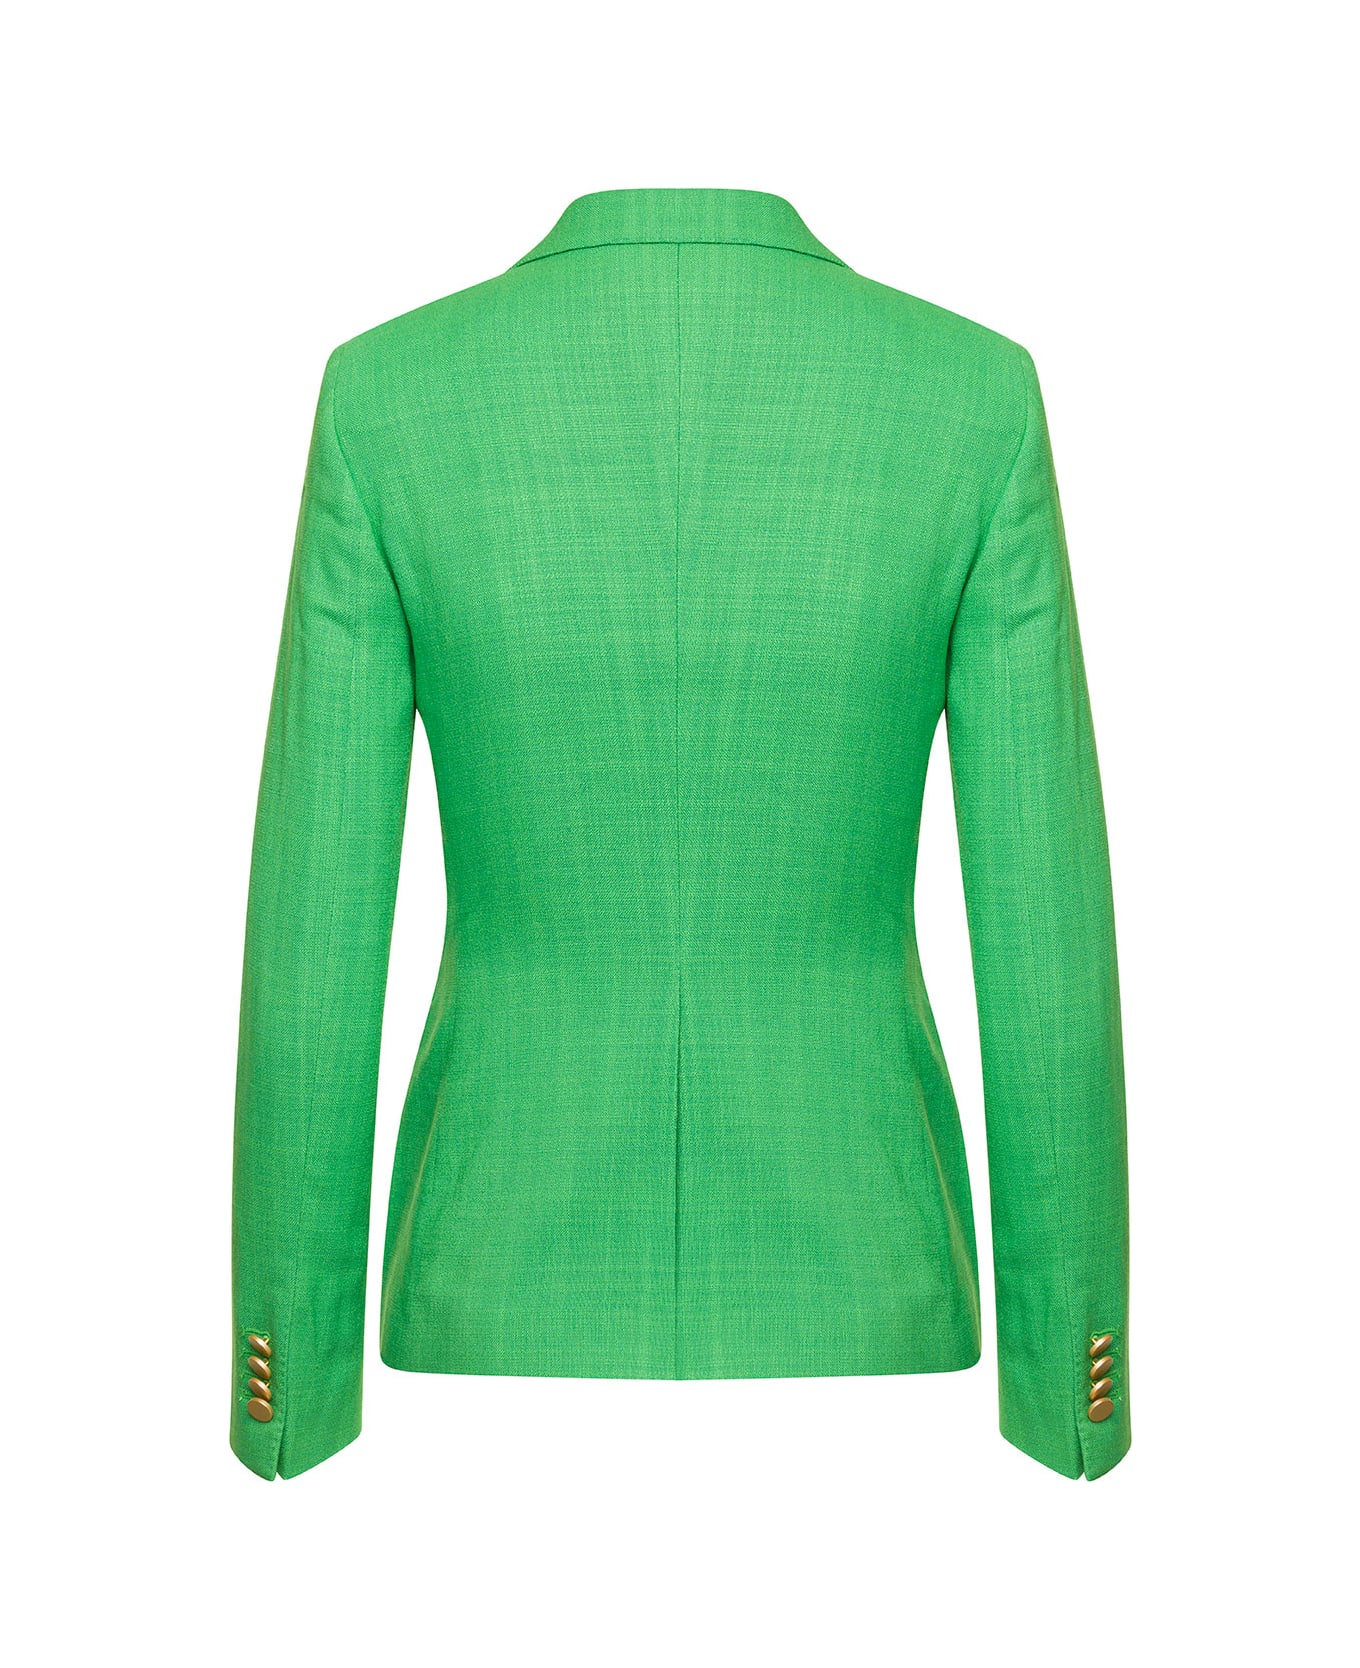 Tagliatore Green Double-breasted Jacket With Gold-tone Buttons In Viscose Blend Woman - Green